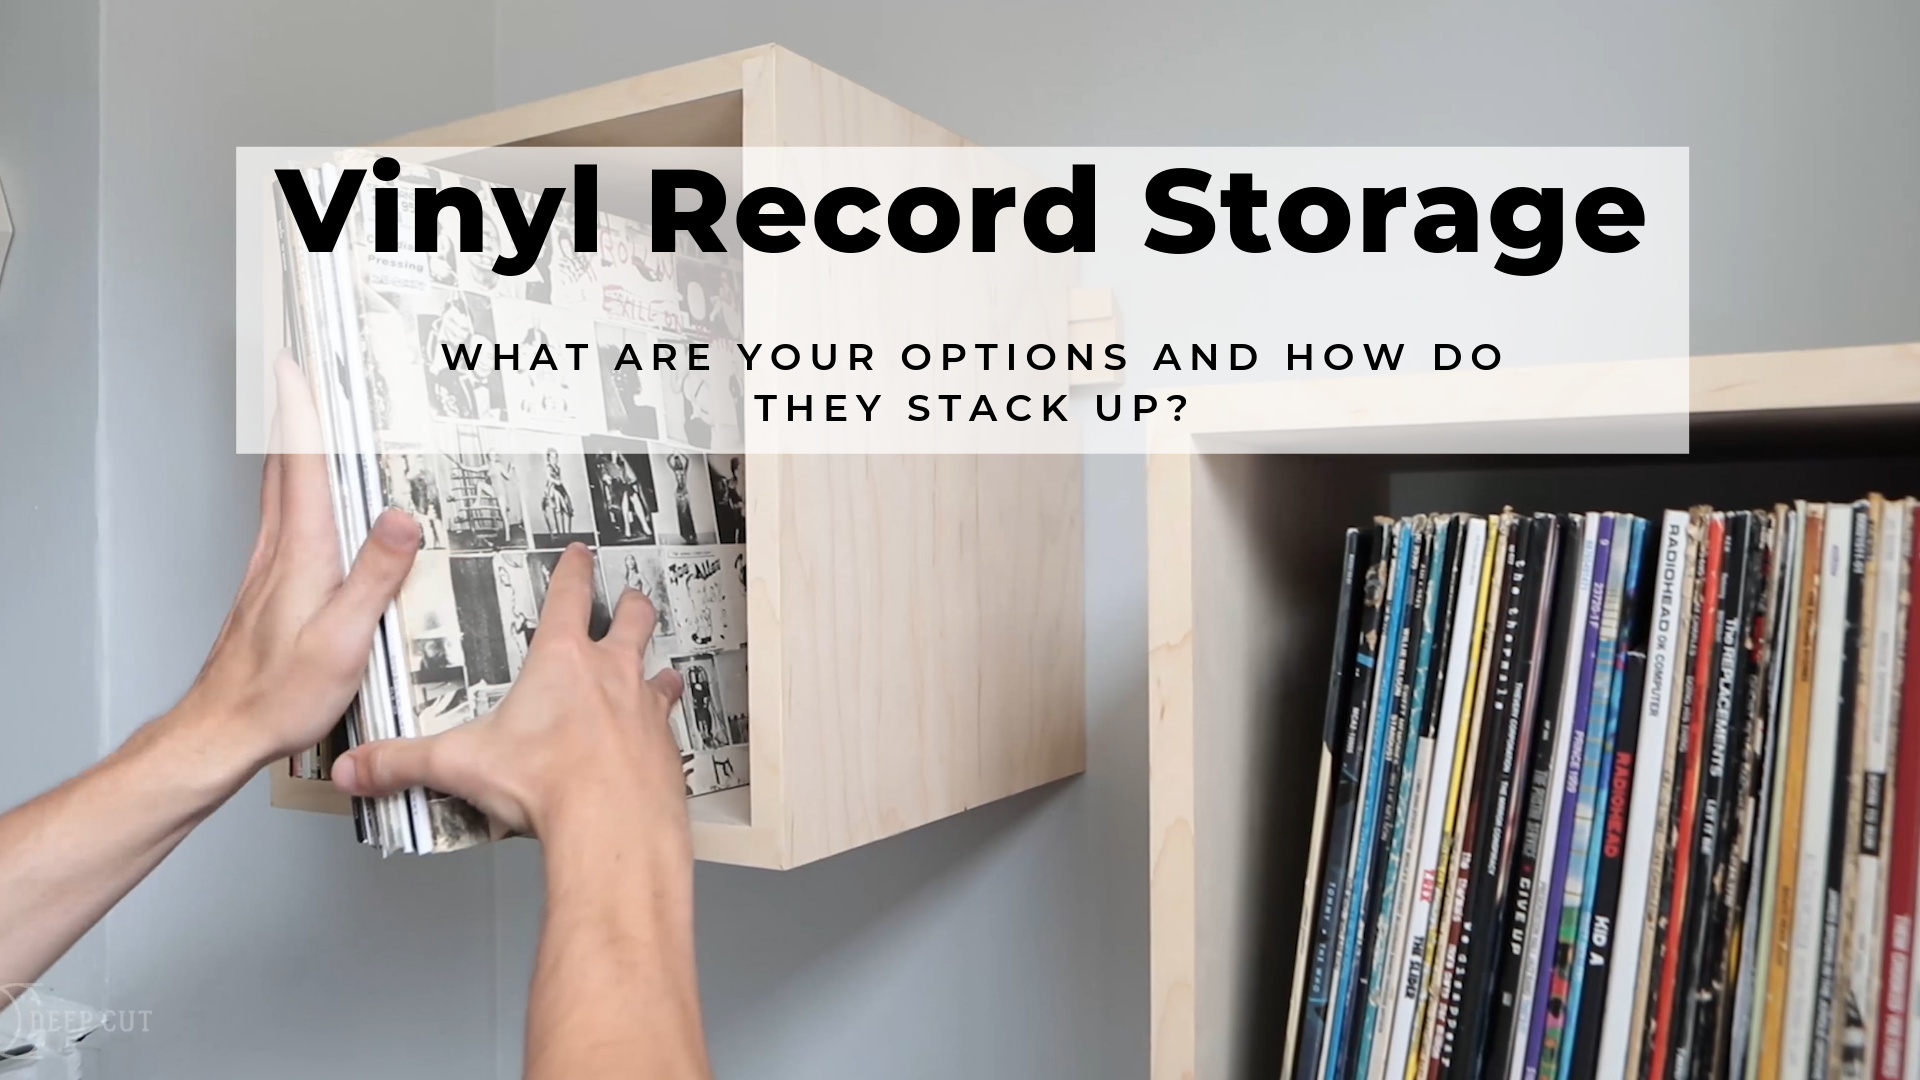 What's The Best Way To Store My Records? Here's How The Options Stack Up